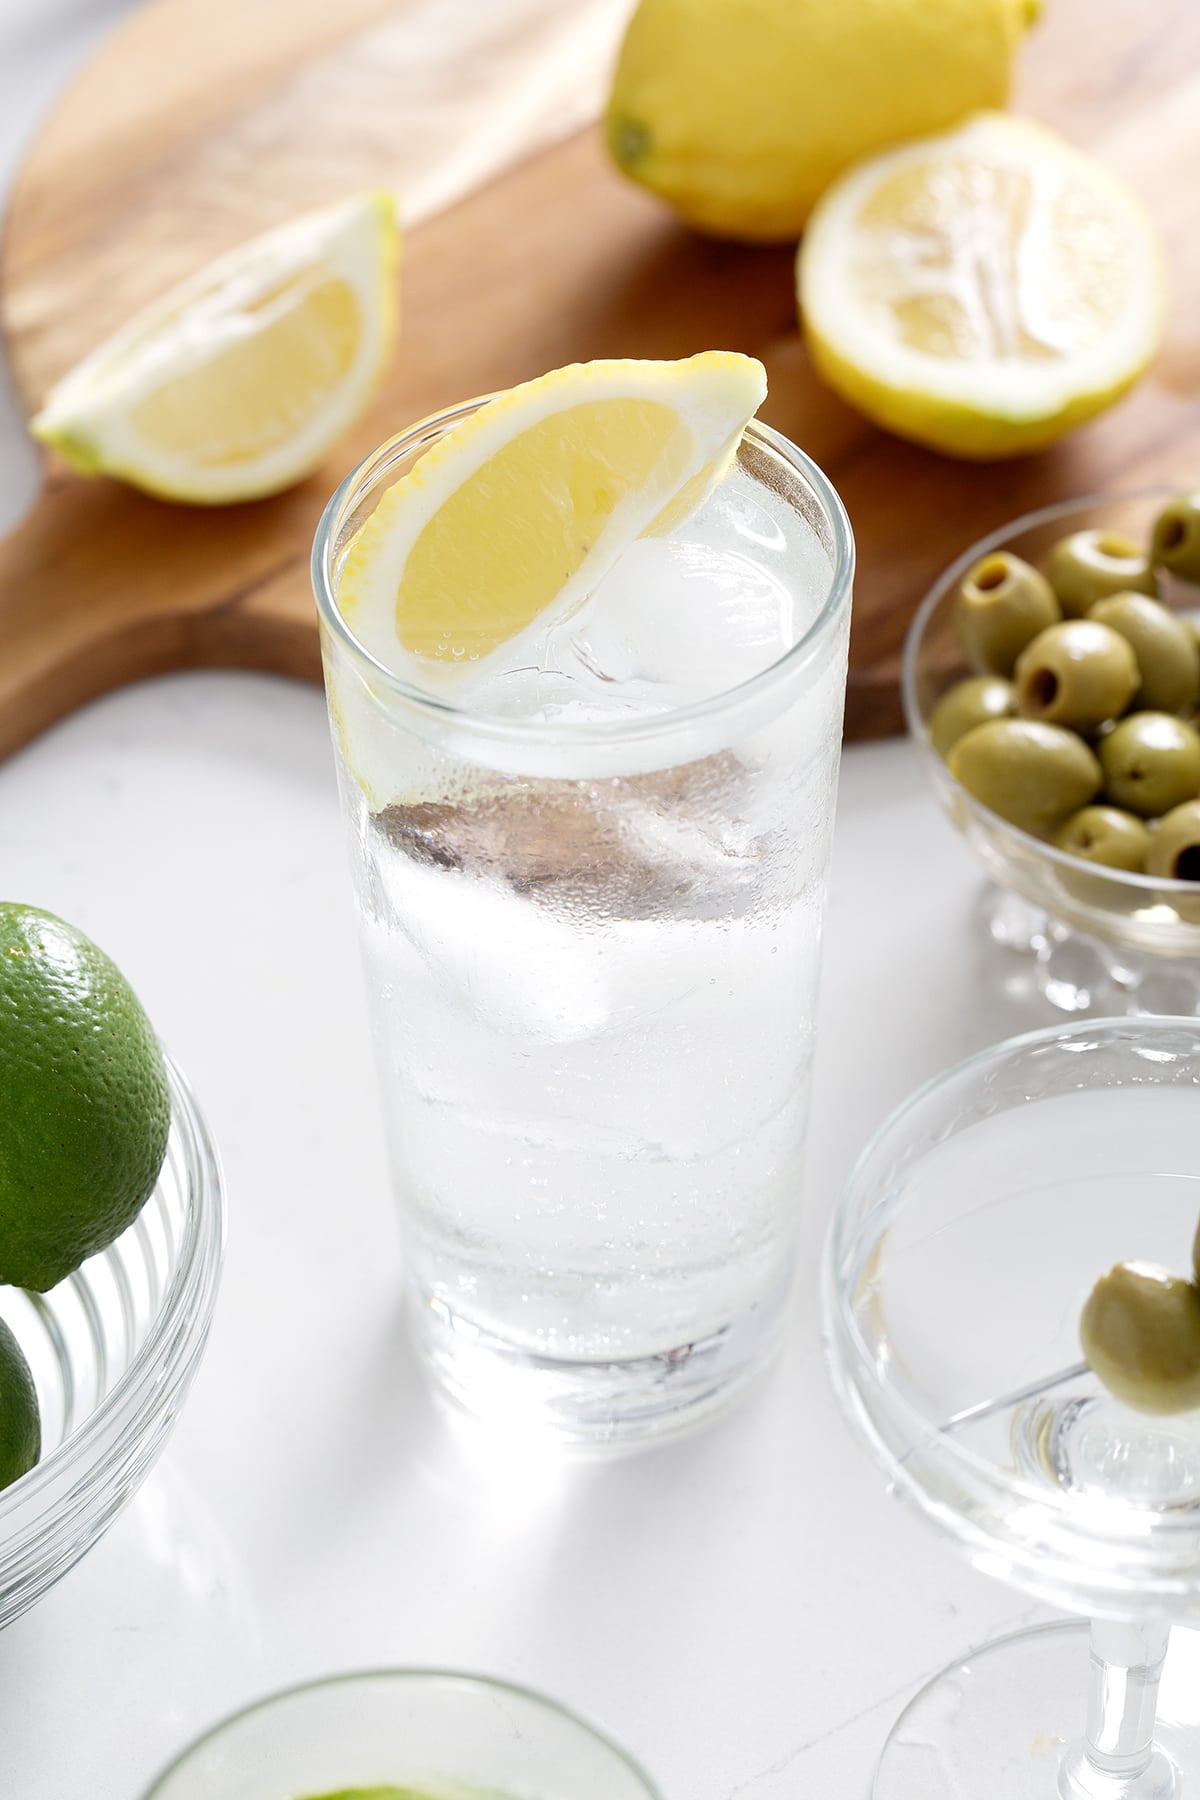 Tom Collins garnishes with a lemon wedge surrounded by lemons and olives